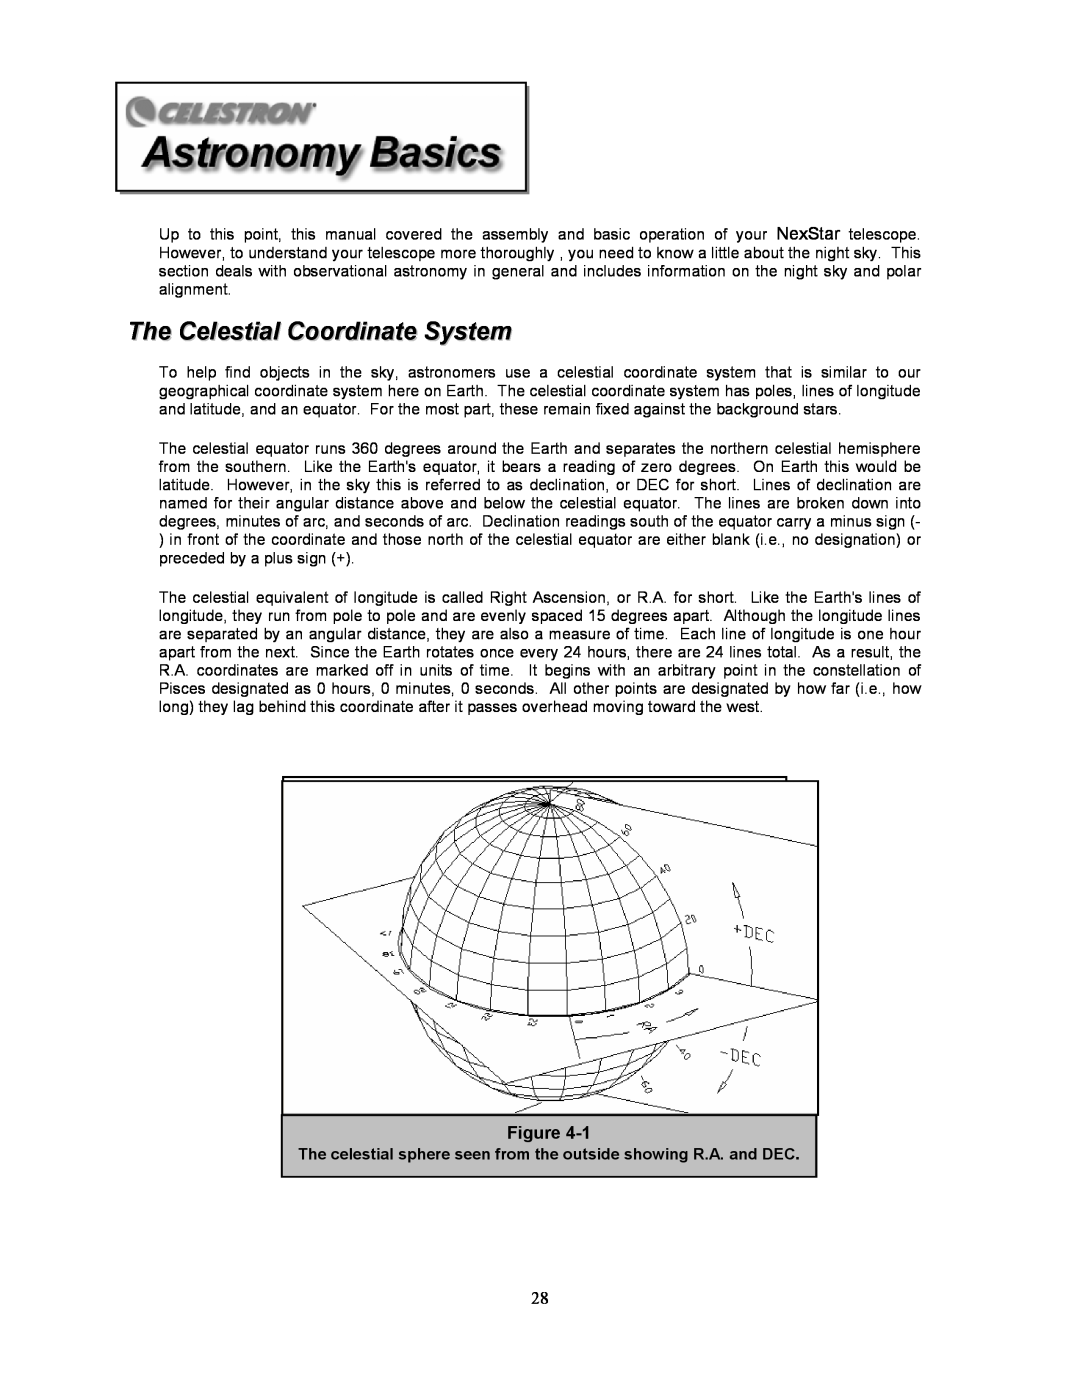 Celestron 8i manual The Celestial Coordinate System, The celestial sphere seen from the outside showing R.A. and DEC 